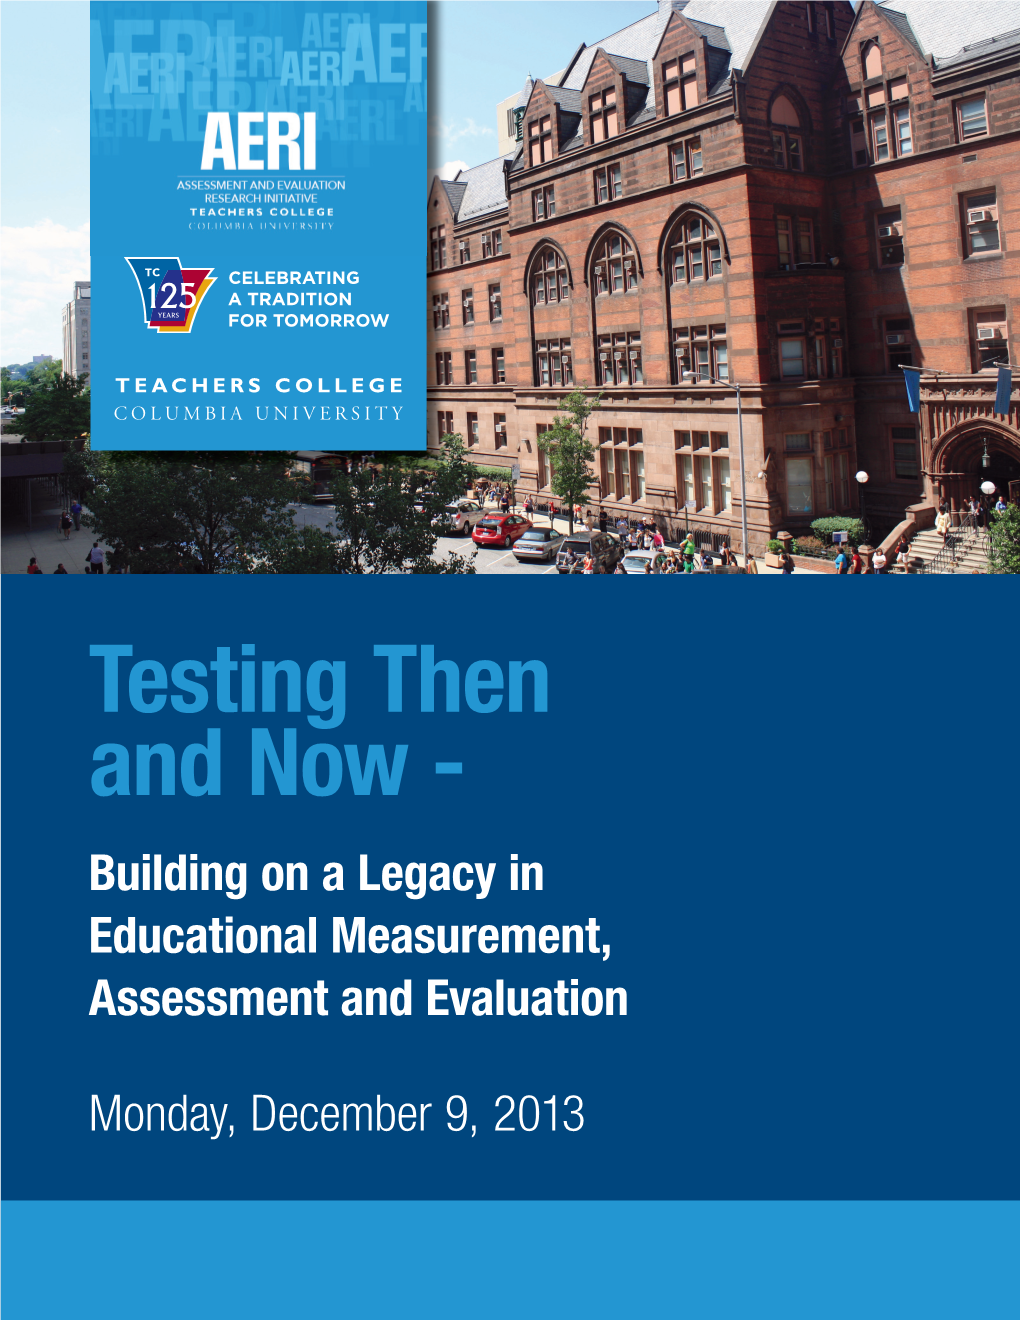 Testing Then and Now - Building on a Legacy in Educational Measurement, Assessment and Evaluation